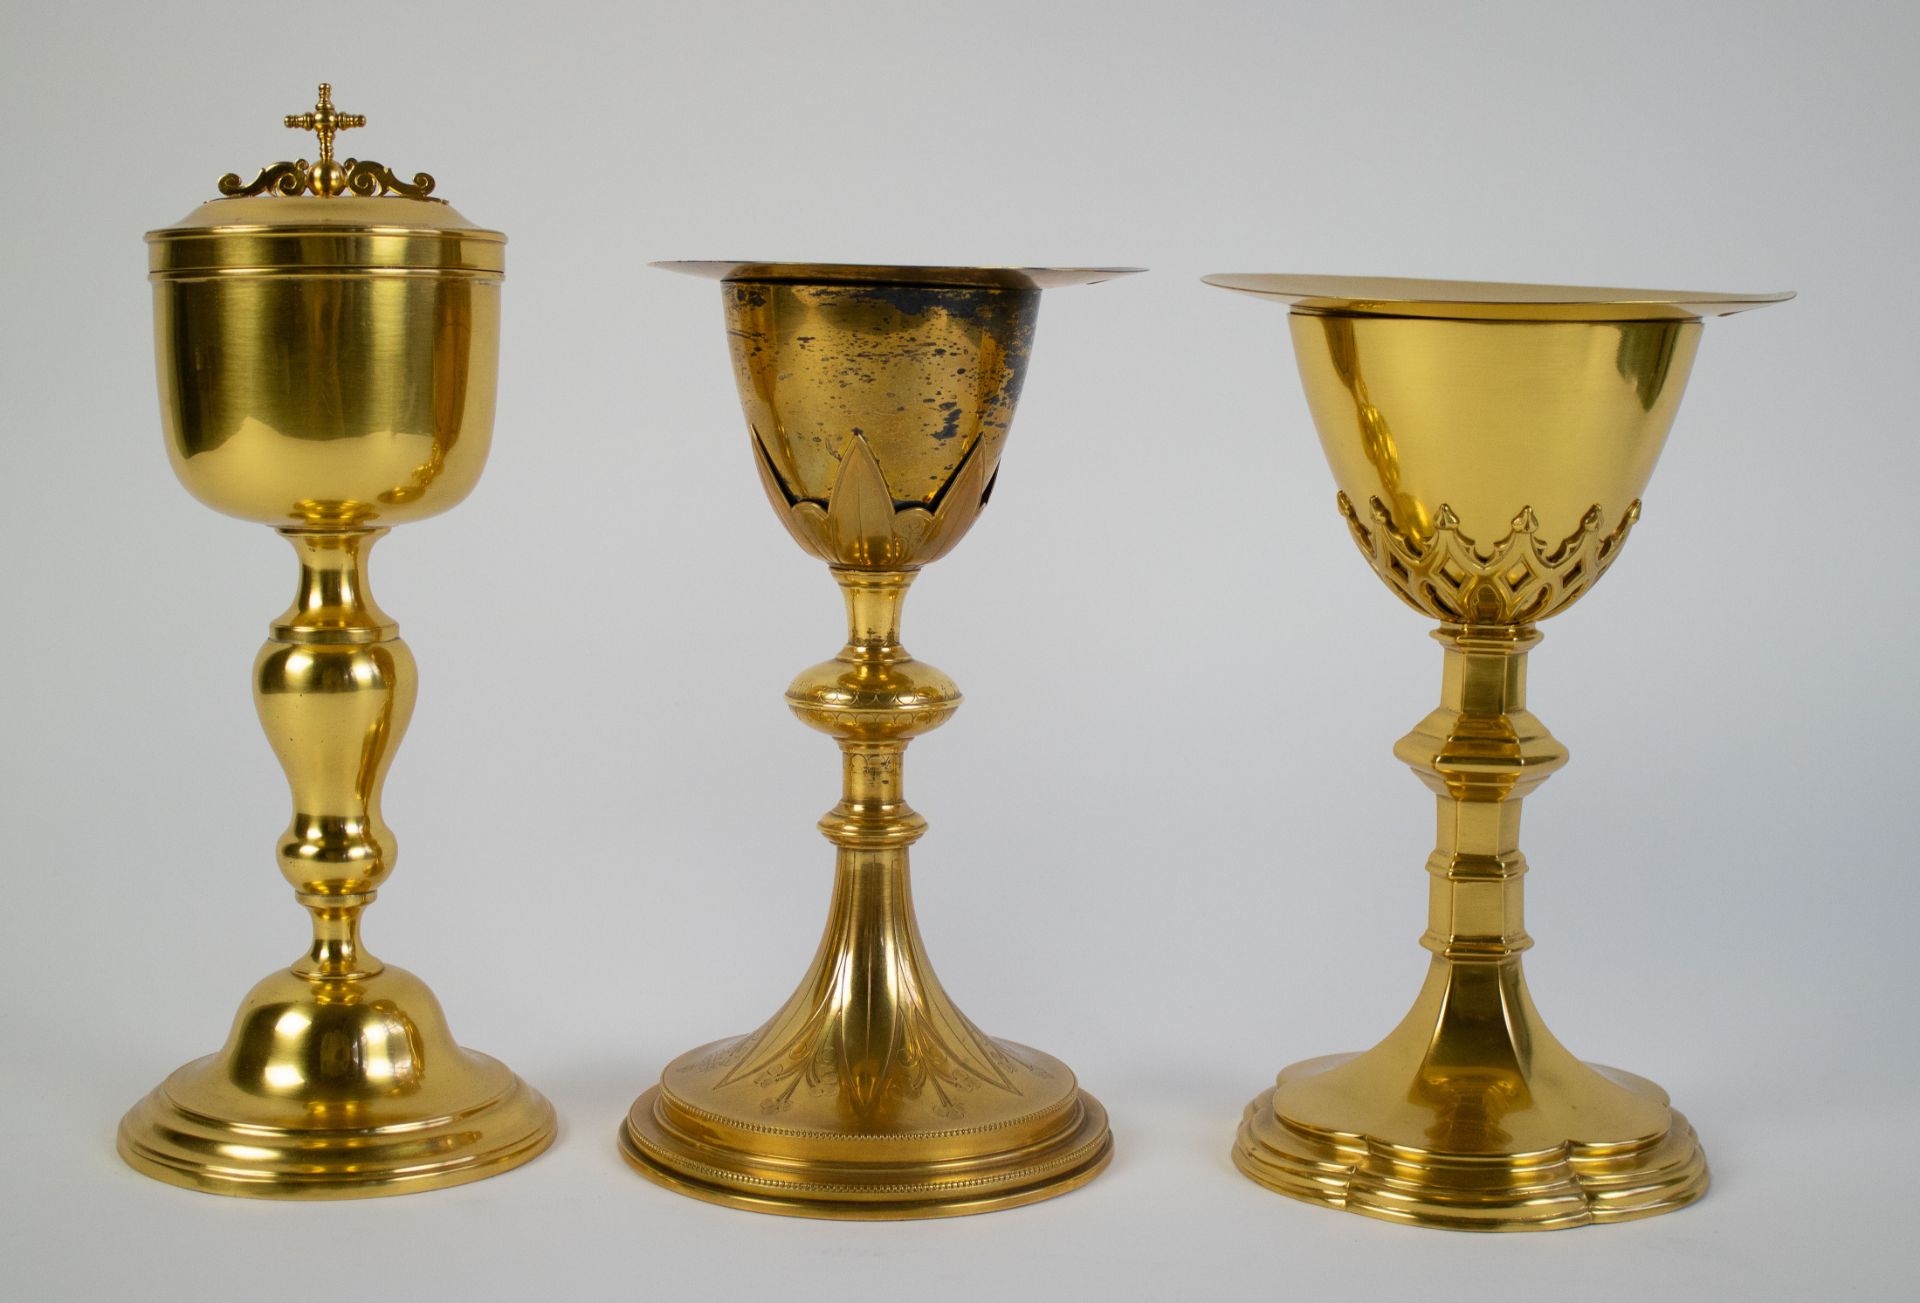 Lot with 3 chalices and 2 patens